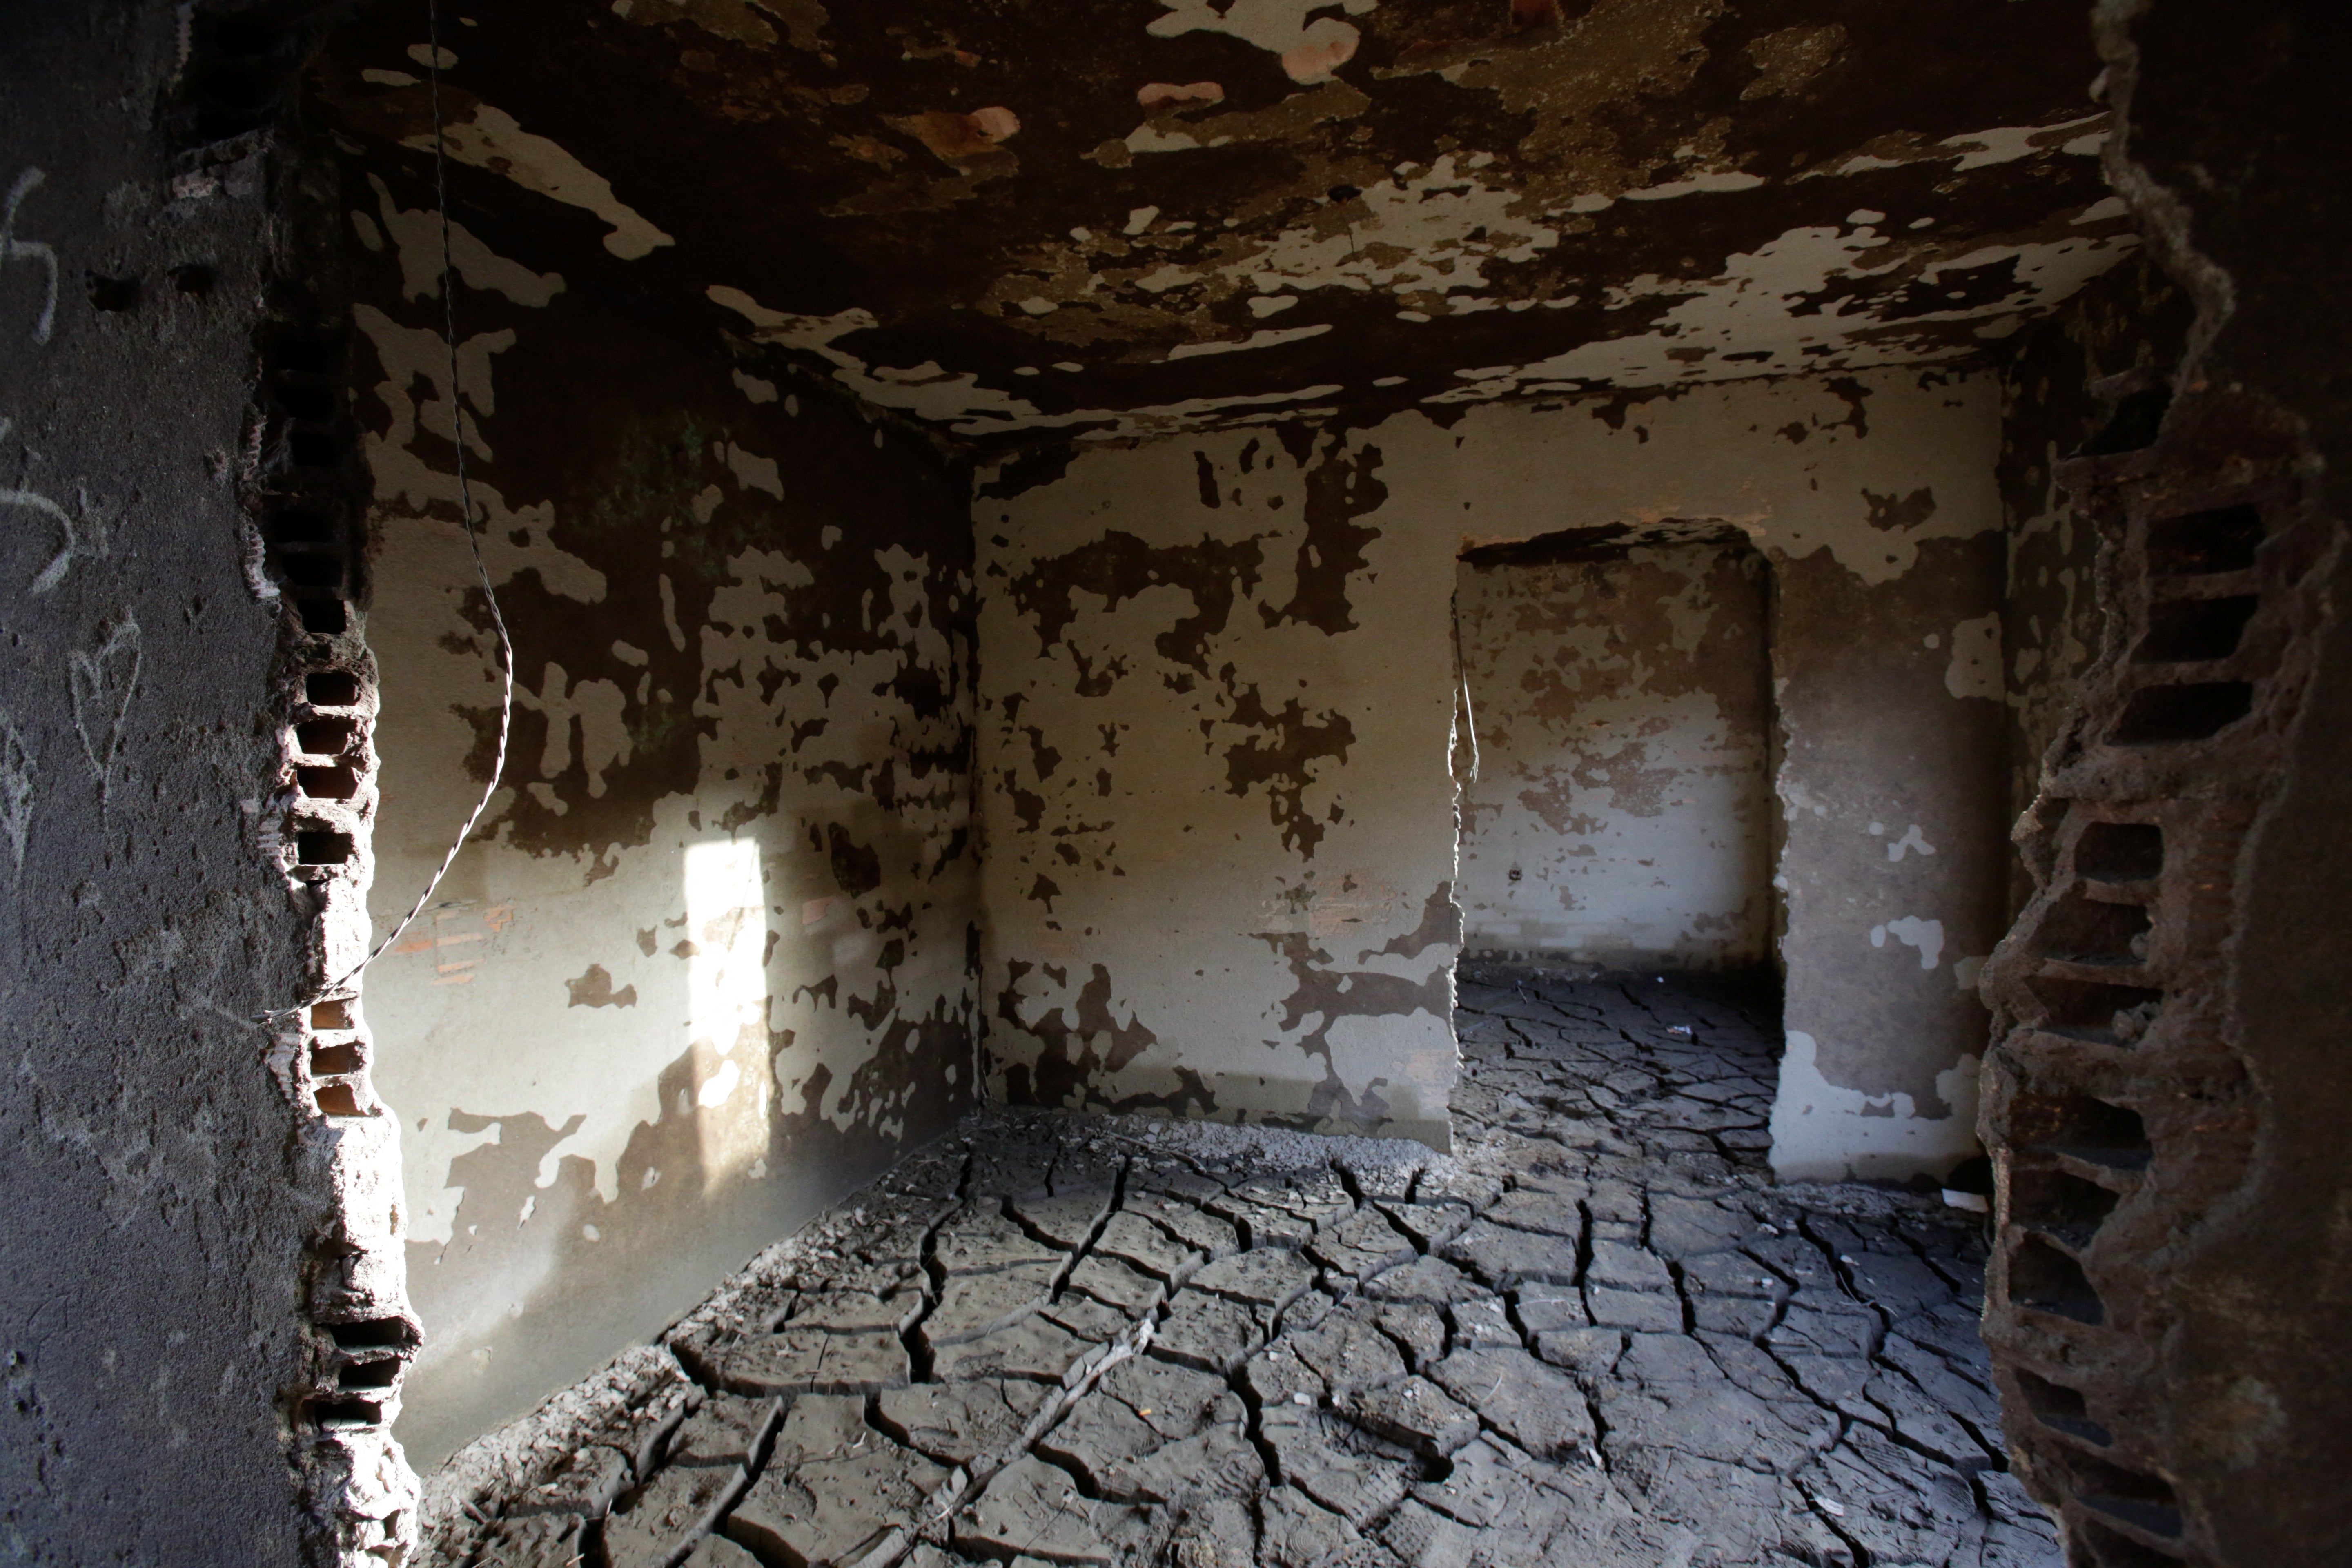 The interior of a house, the muddy ground of which has been cracked by the drought in some spots.